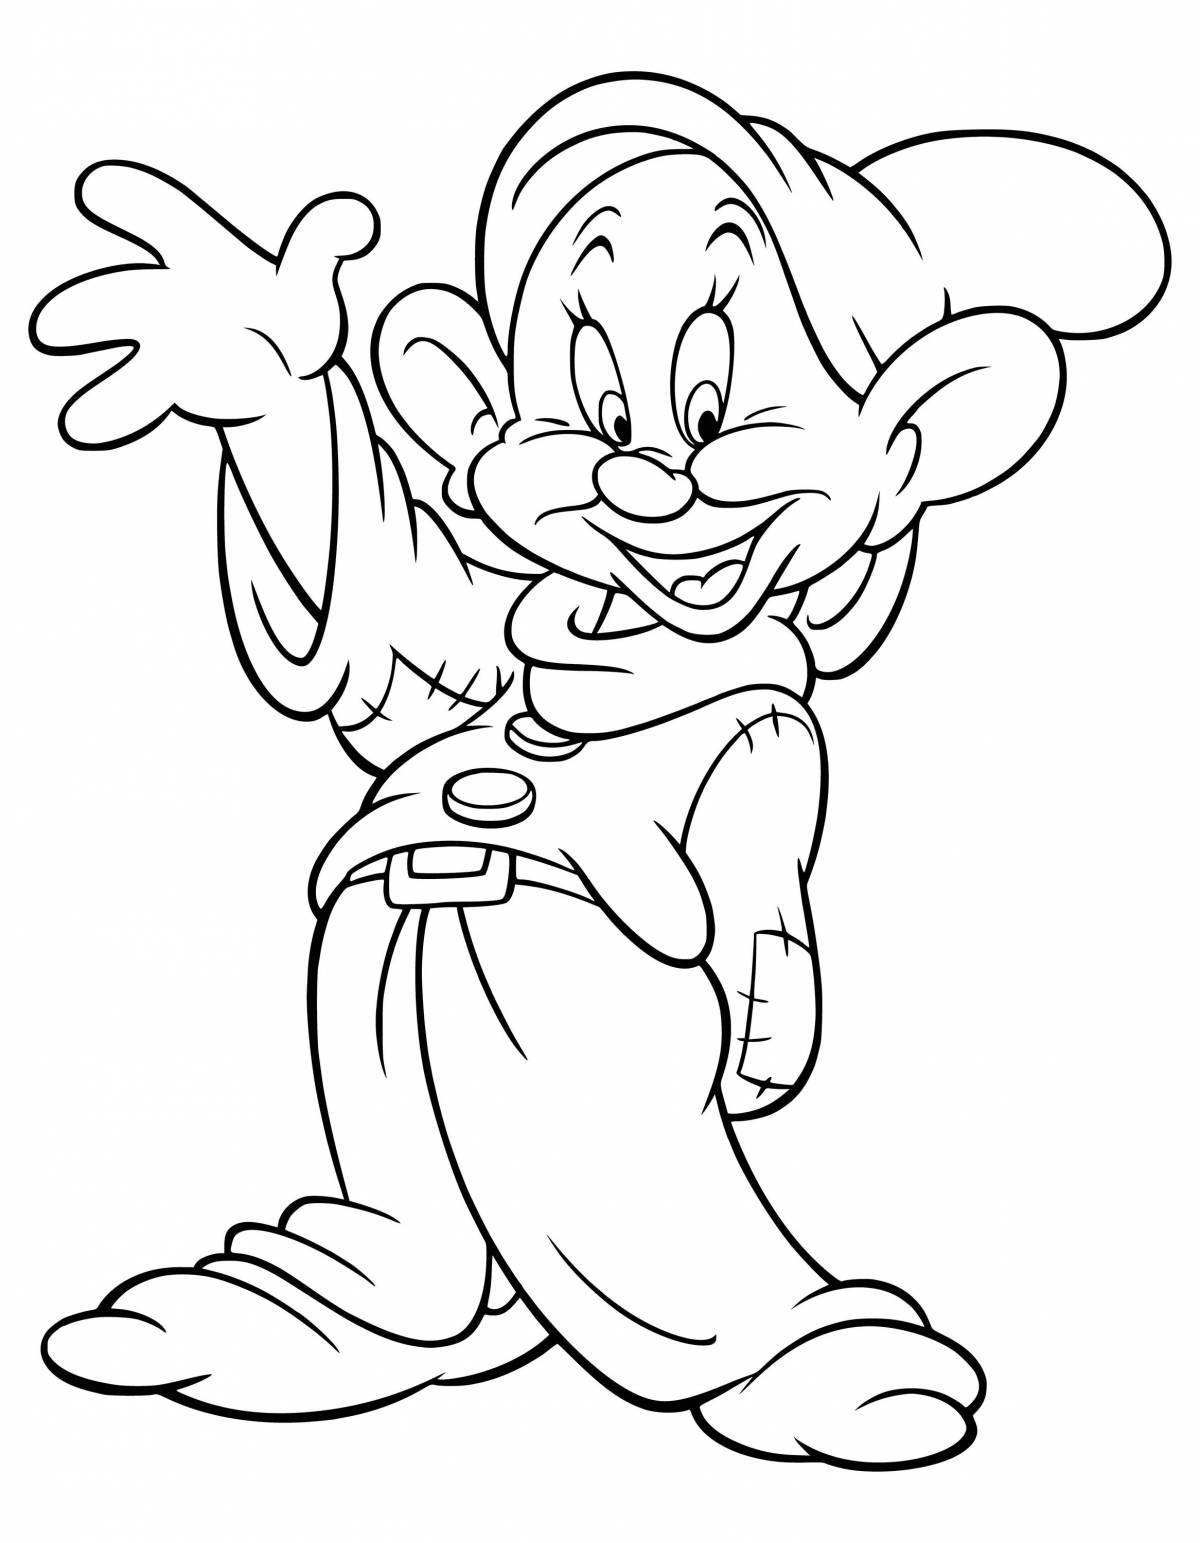 Coloring page of cartoon characters